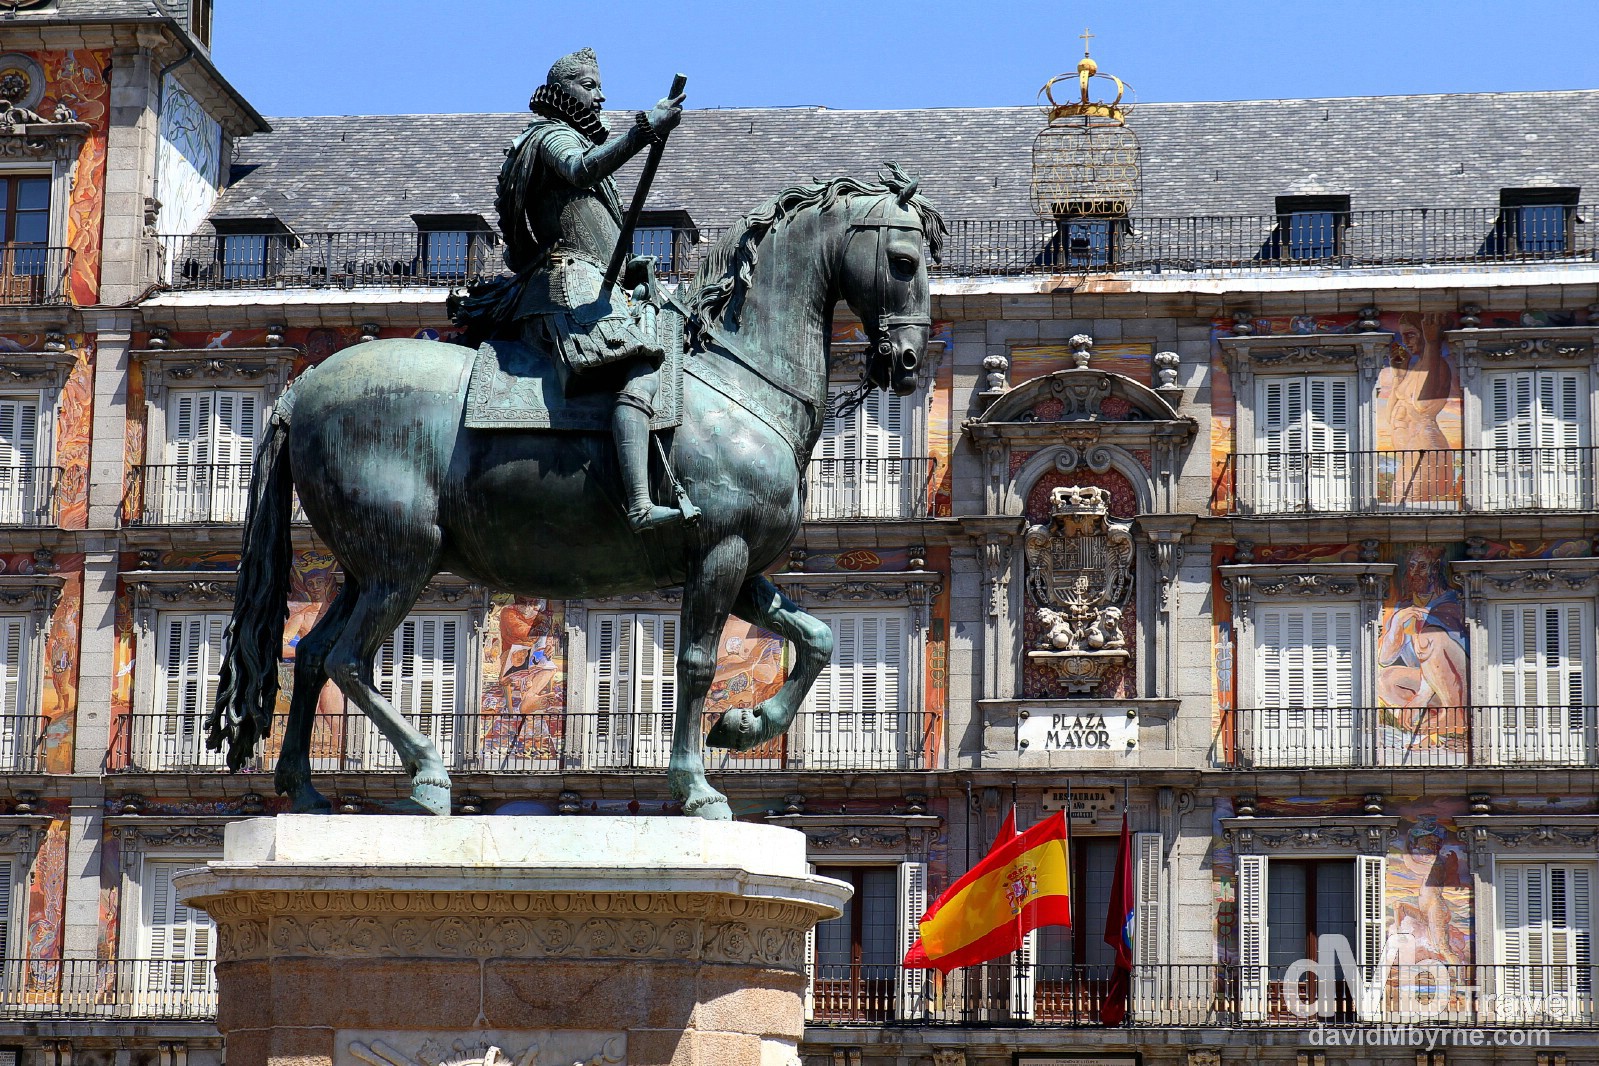 A statue of King Philip III in Plaza Mayor, Madrid, Spain. June 14th, 2014.